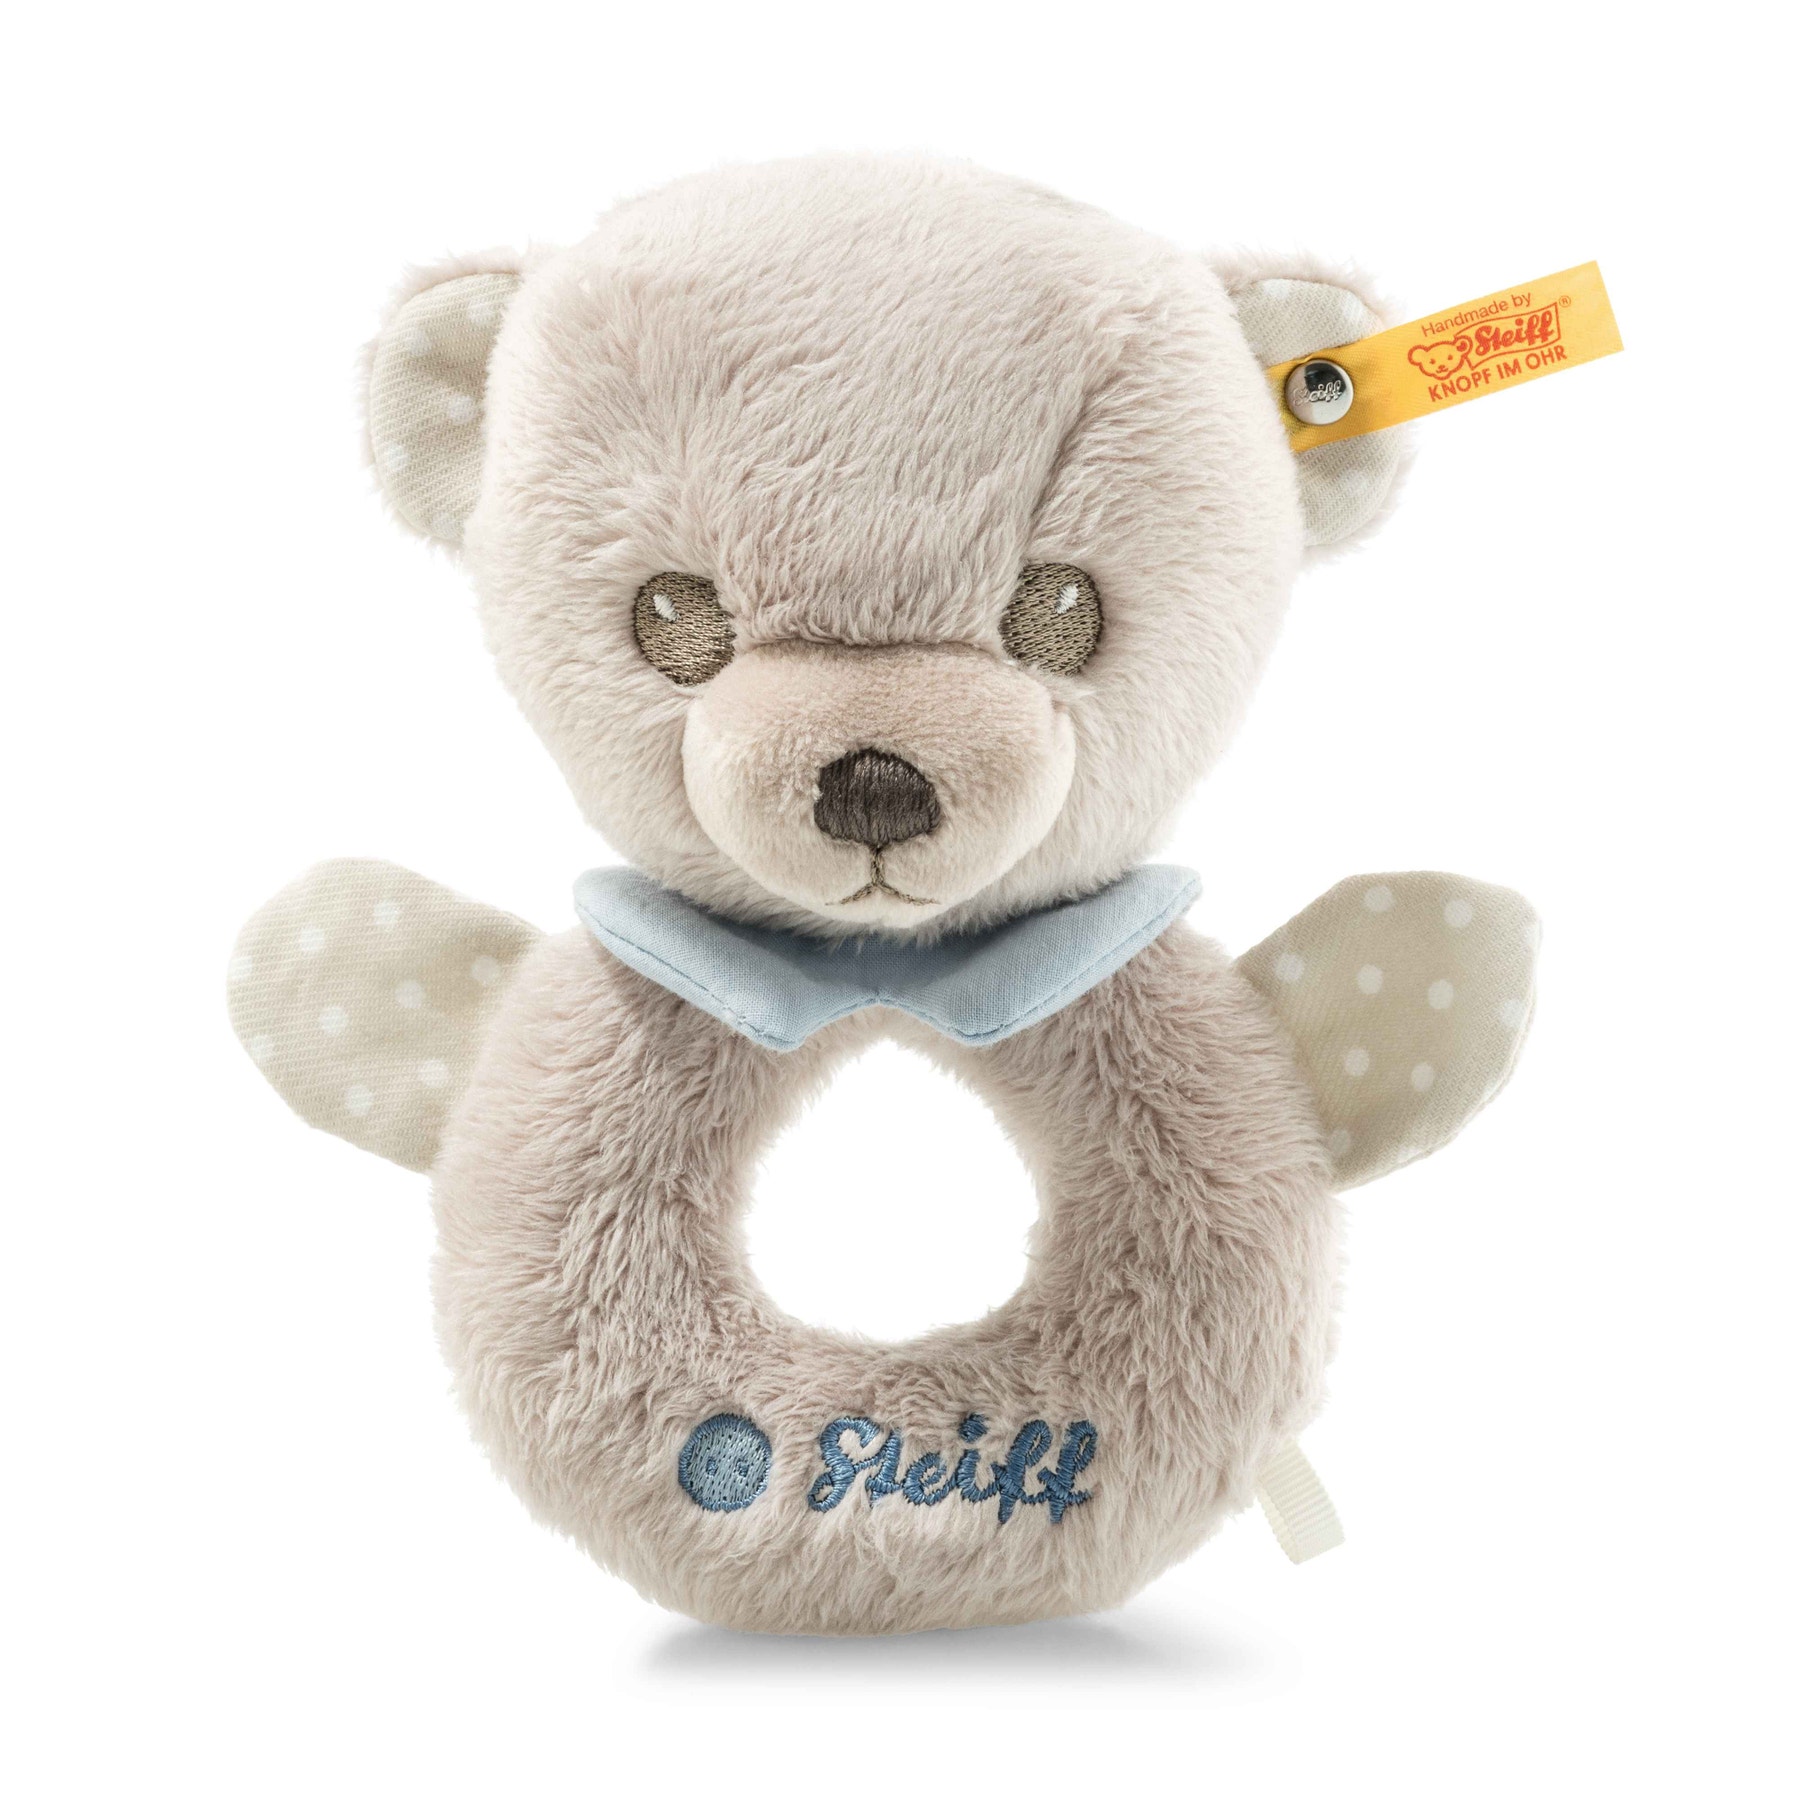 Hello Baby Levi Teddy bear grip toy with rattle in gift box